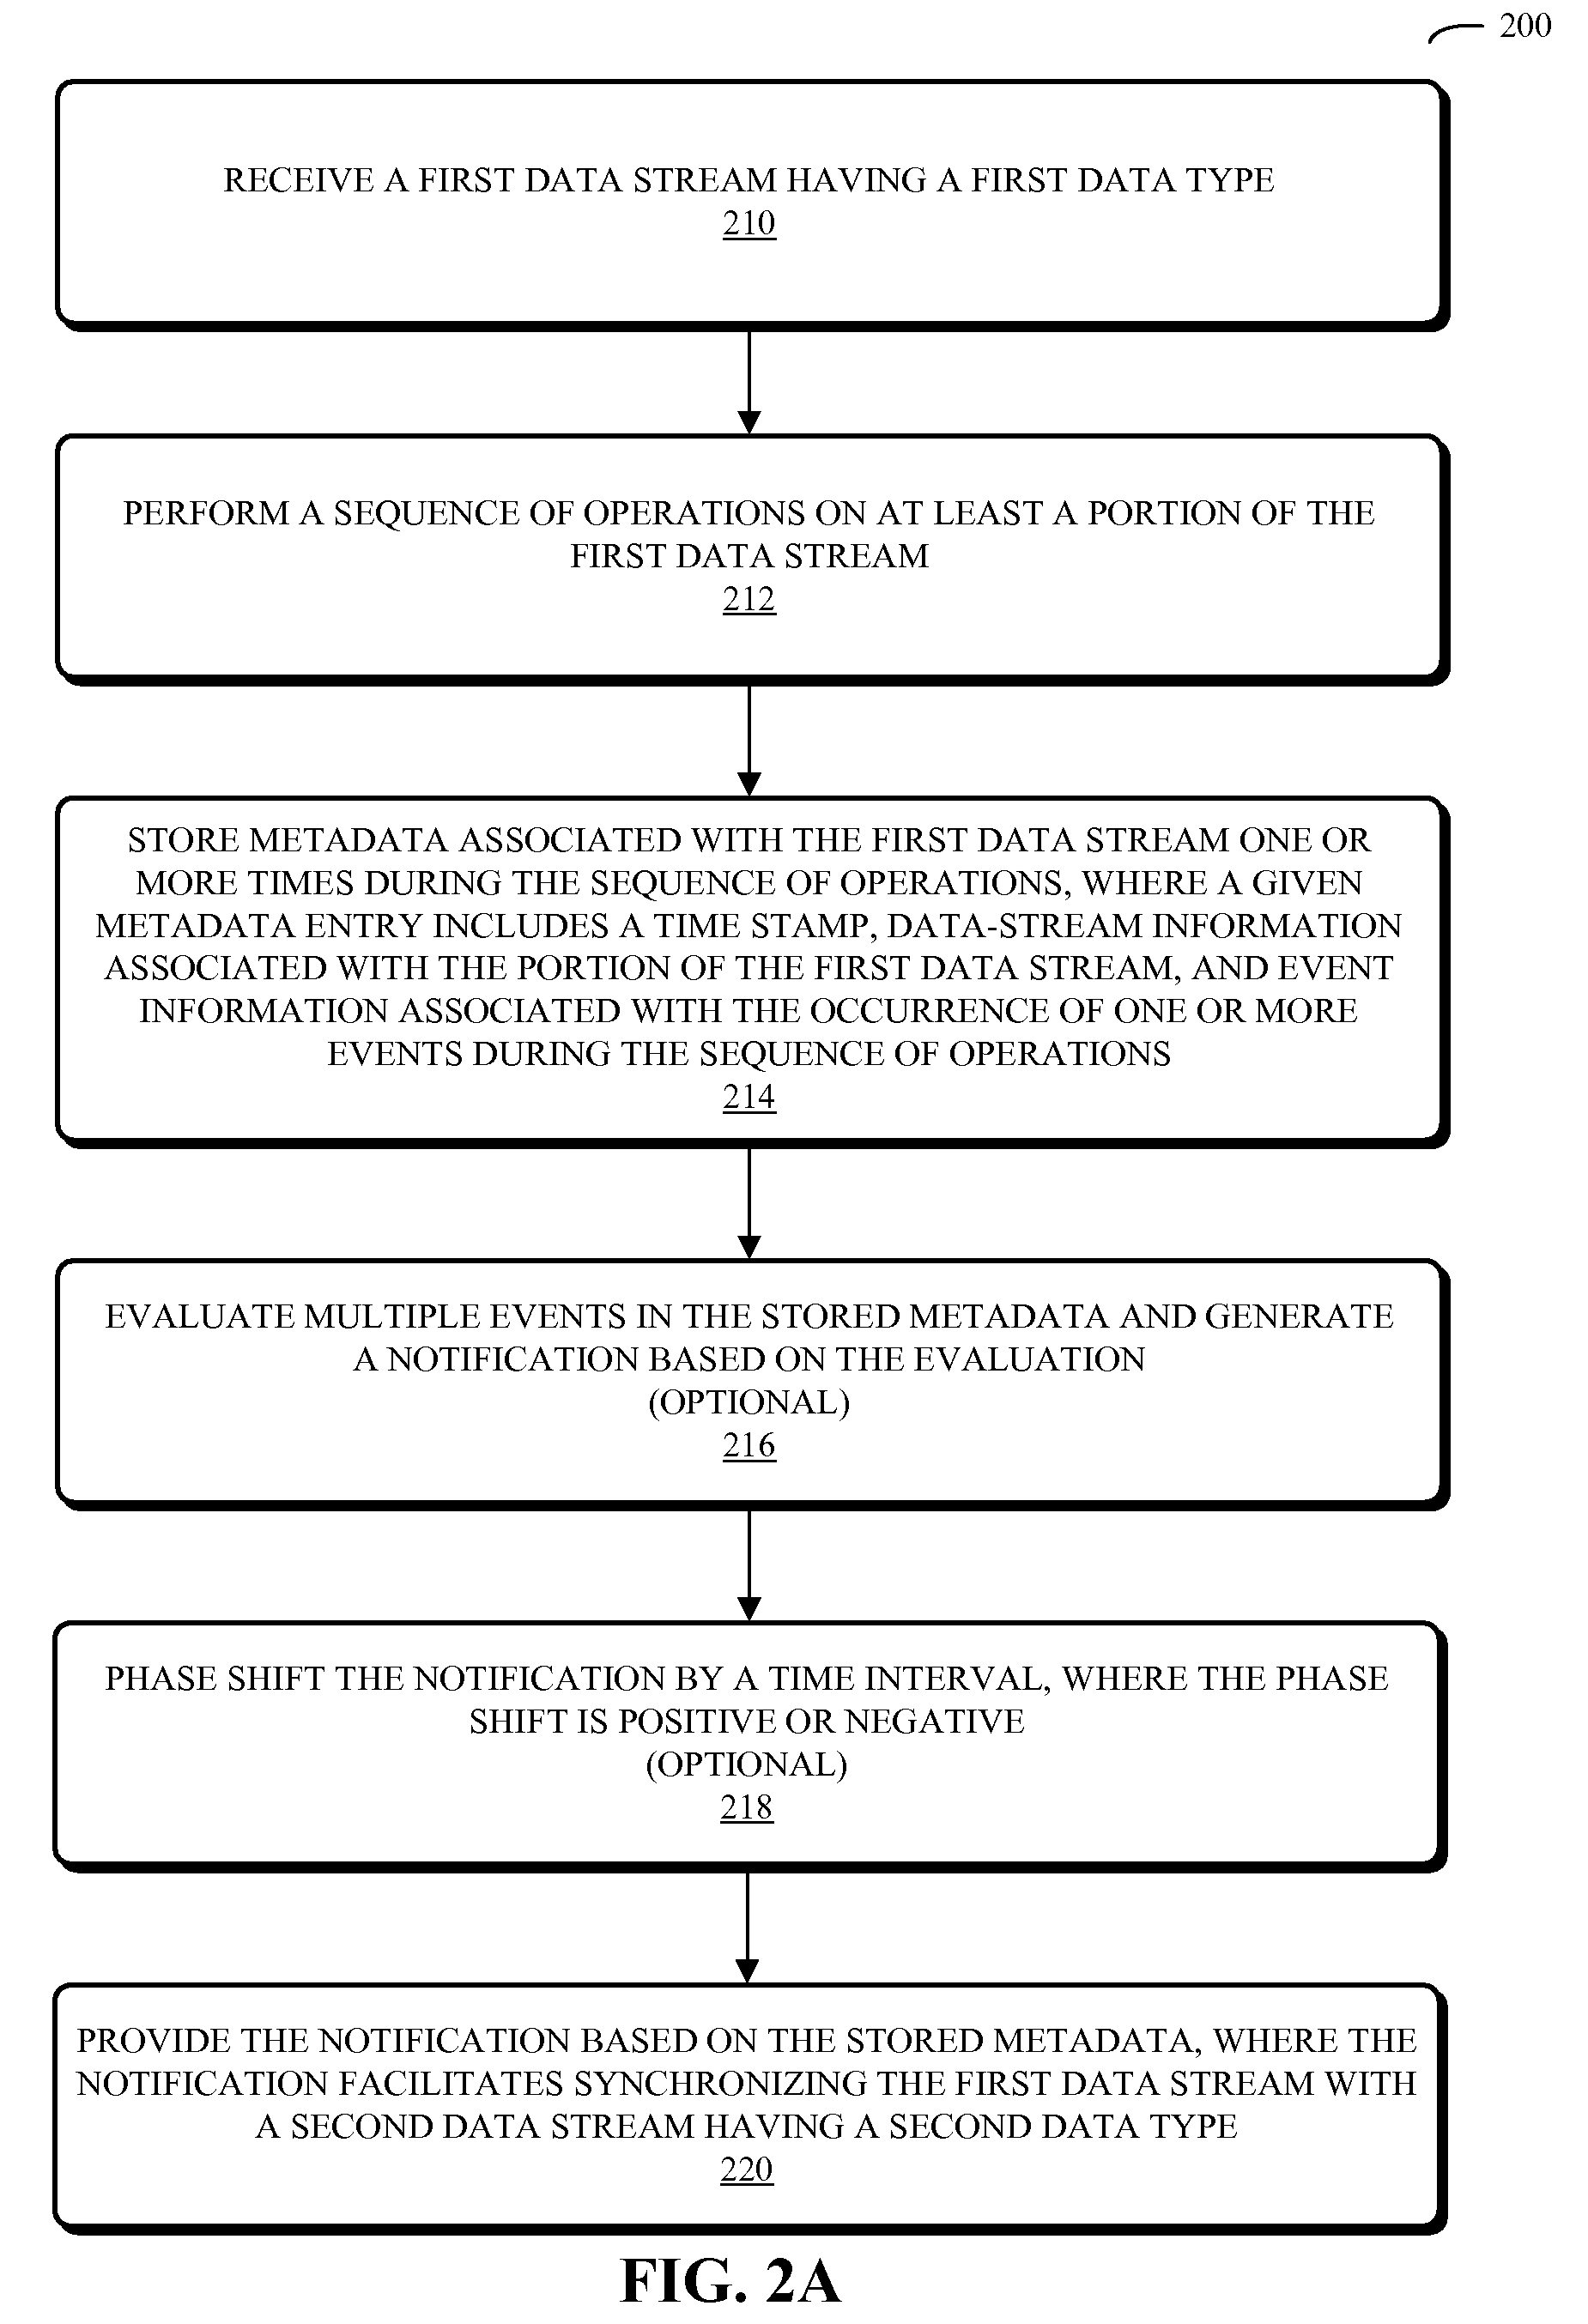 Using time-stamped event entries to facilitate synchronizing data streams